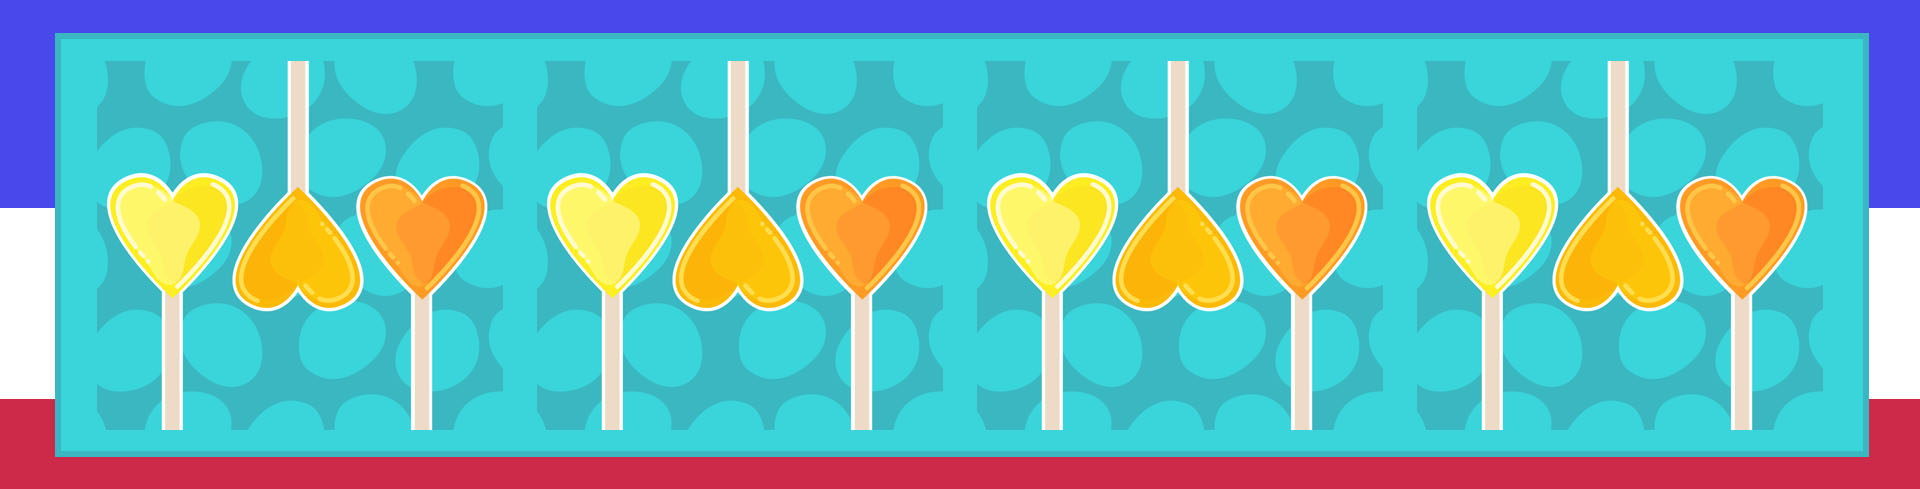 Three candy hearts against a blue background.